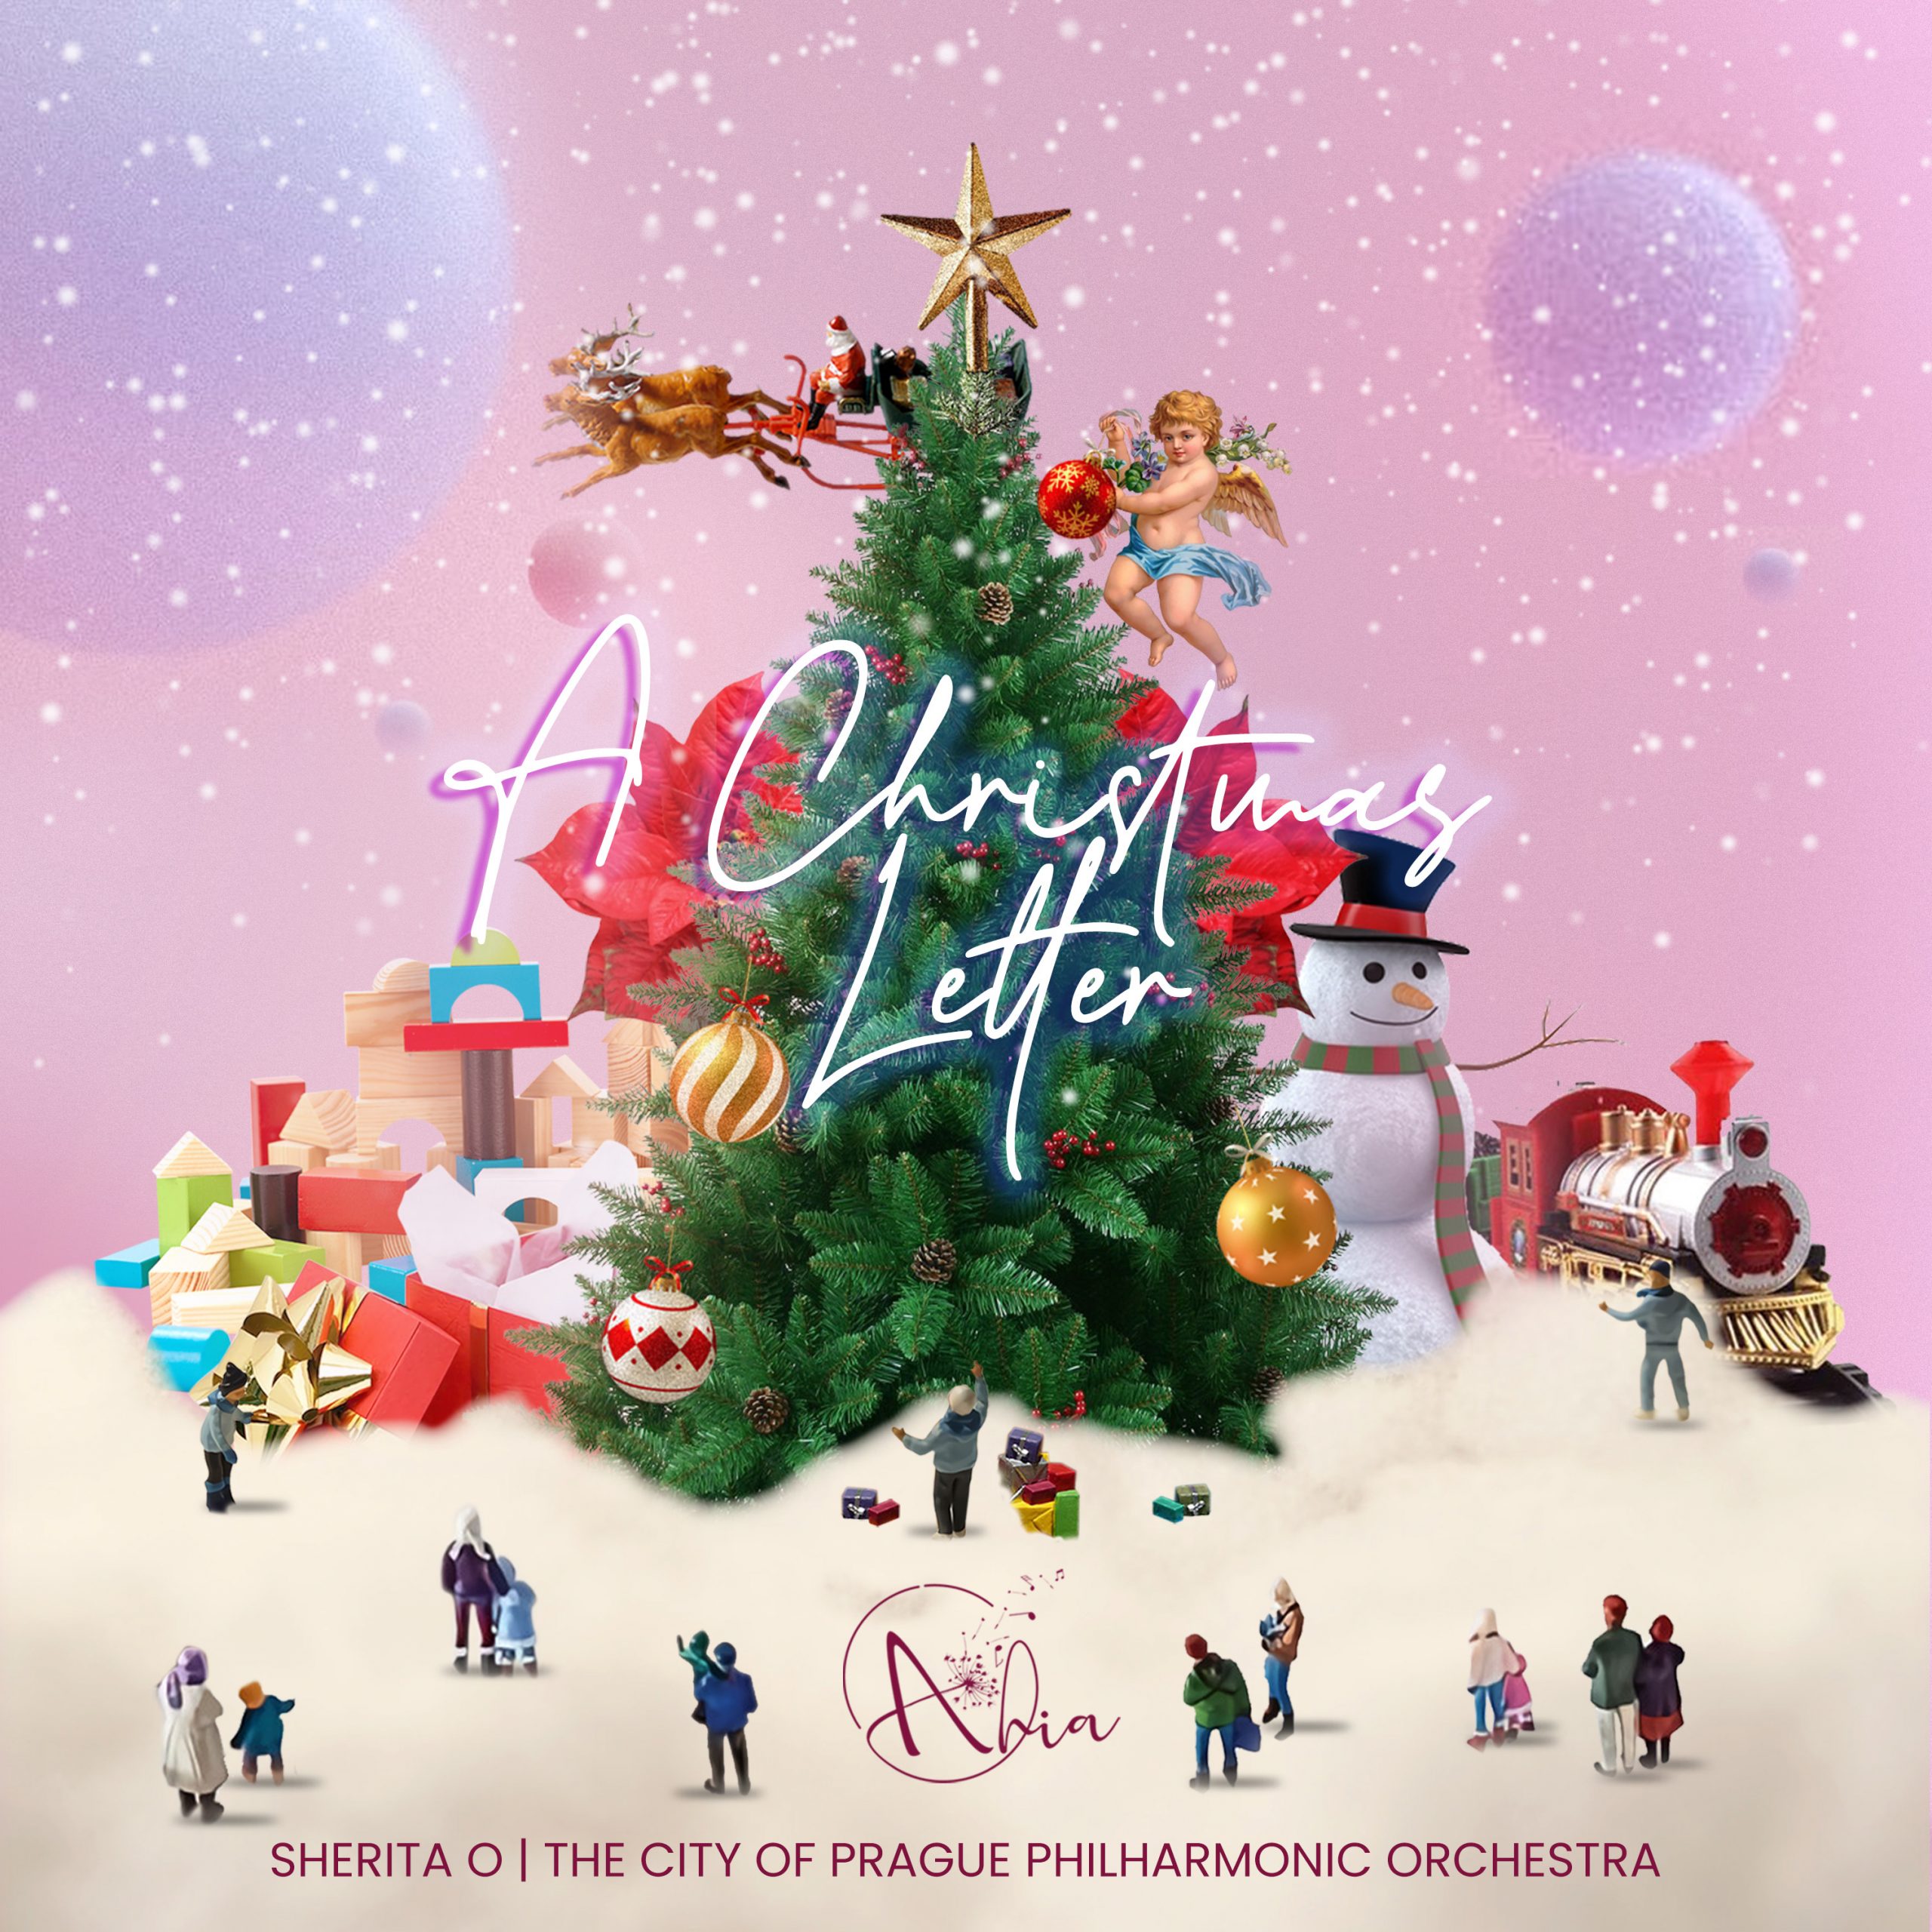 The new single ‘A Christmas Letter’ from ‘Aria’ with its elegant, euphoric and exquisite Christmas mood is on the playlist now.